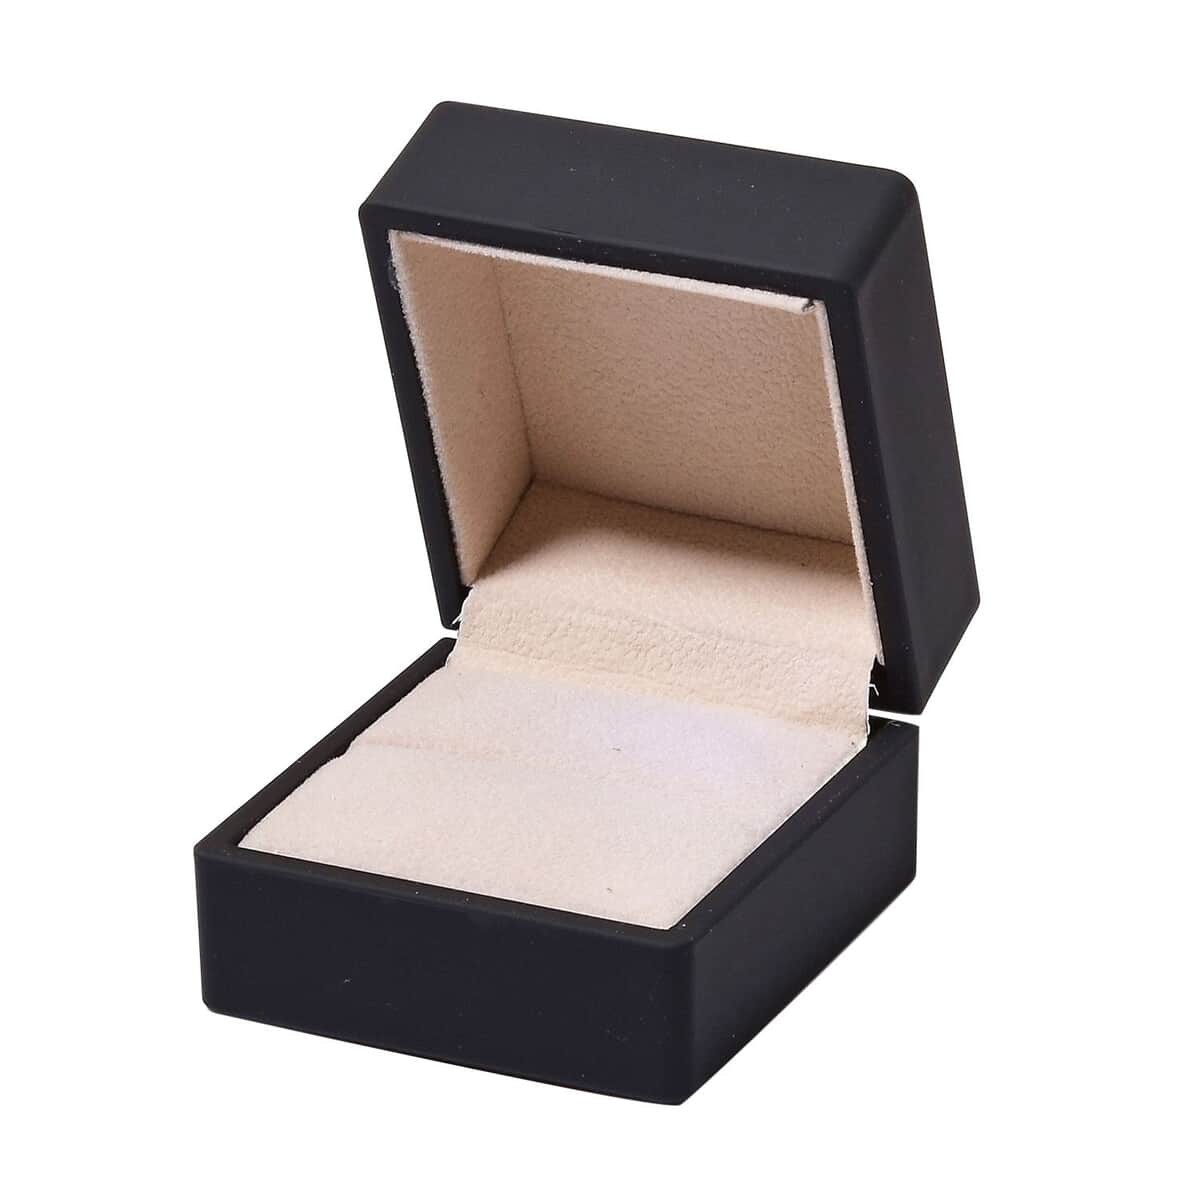 Black Solid Luxurious Polish Ring Jewelry Box with LED Light (Can Hold 1 up to 2 Rings) (2.5"x2.4"x2") image number 4